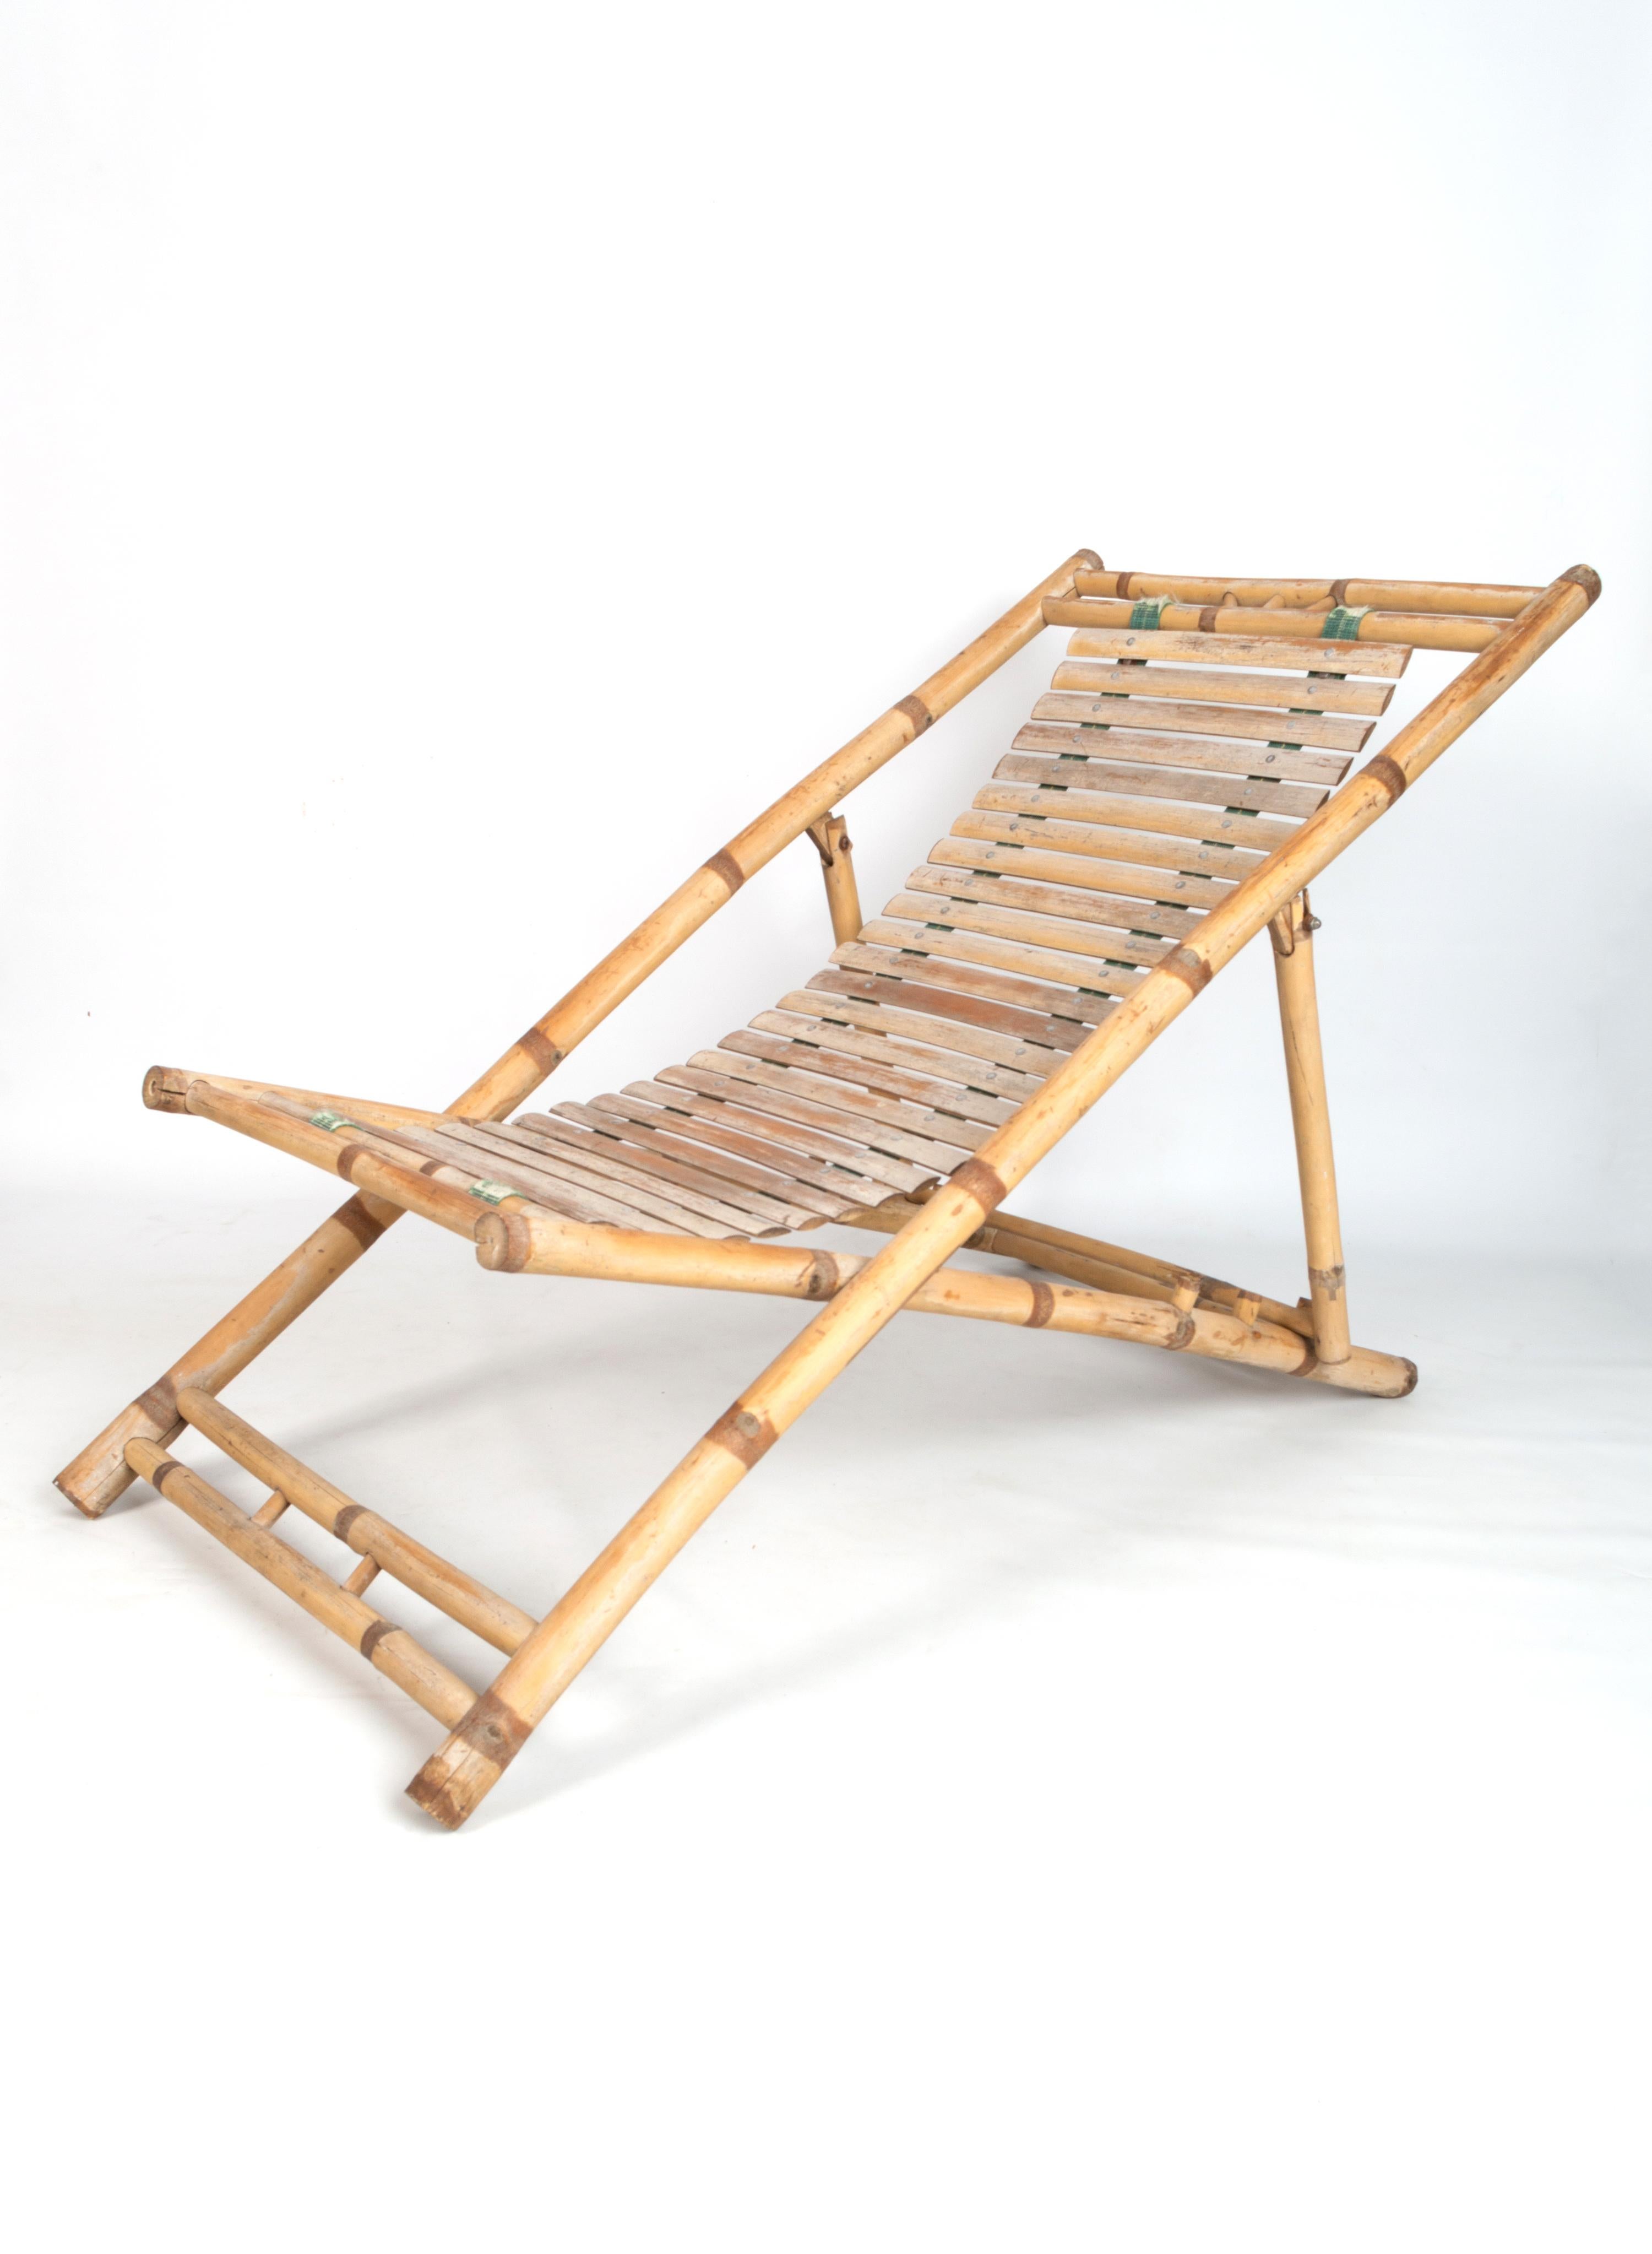 Pair of Bamboo Deck Chairs Sun Loungers C.1980, Italy For Sale 1